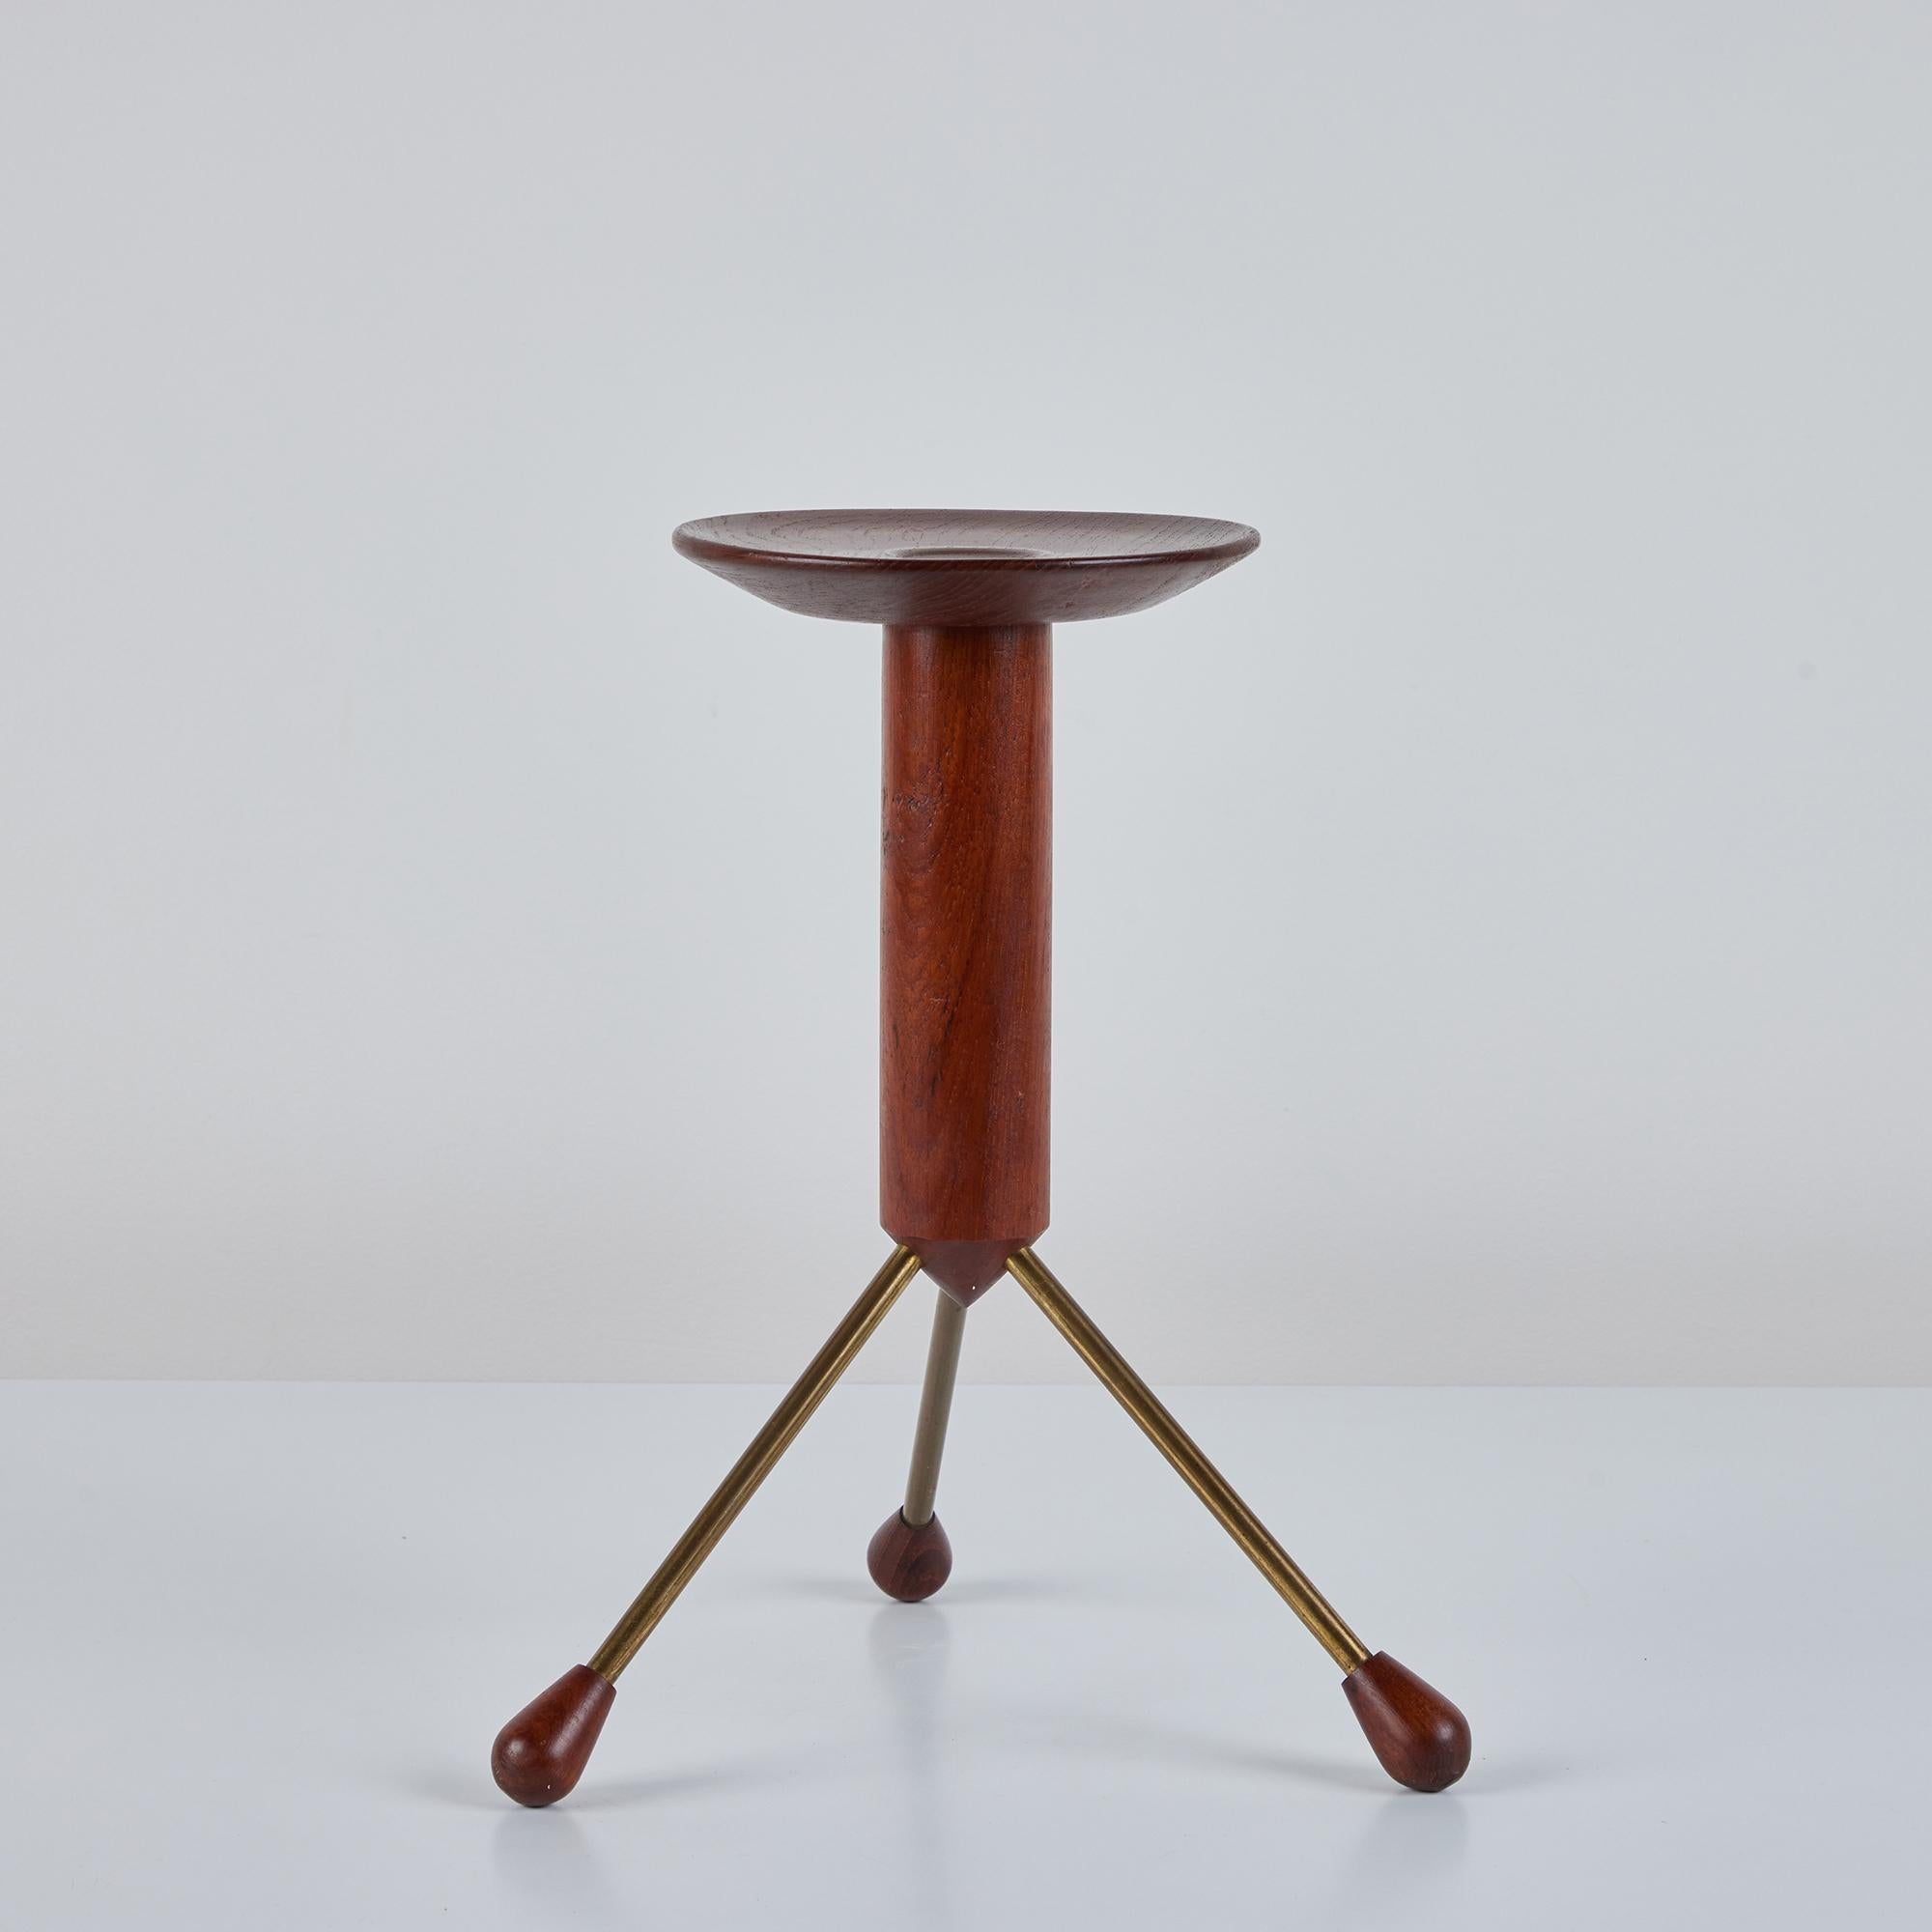 This teak tripod side table by Albert Larsson in and manufactured in Sweden by Alberts Tibro c.1960's. The teak top is supported by a teak shaft and three patinated brass flared legs, capped with a teak footing. The perfect petite table for an